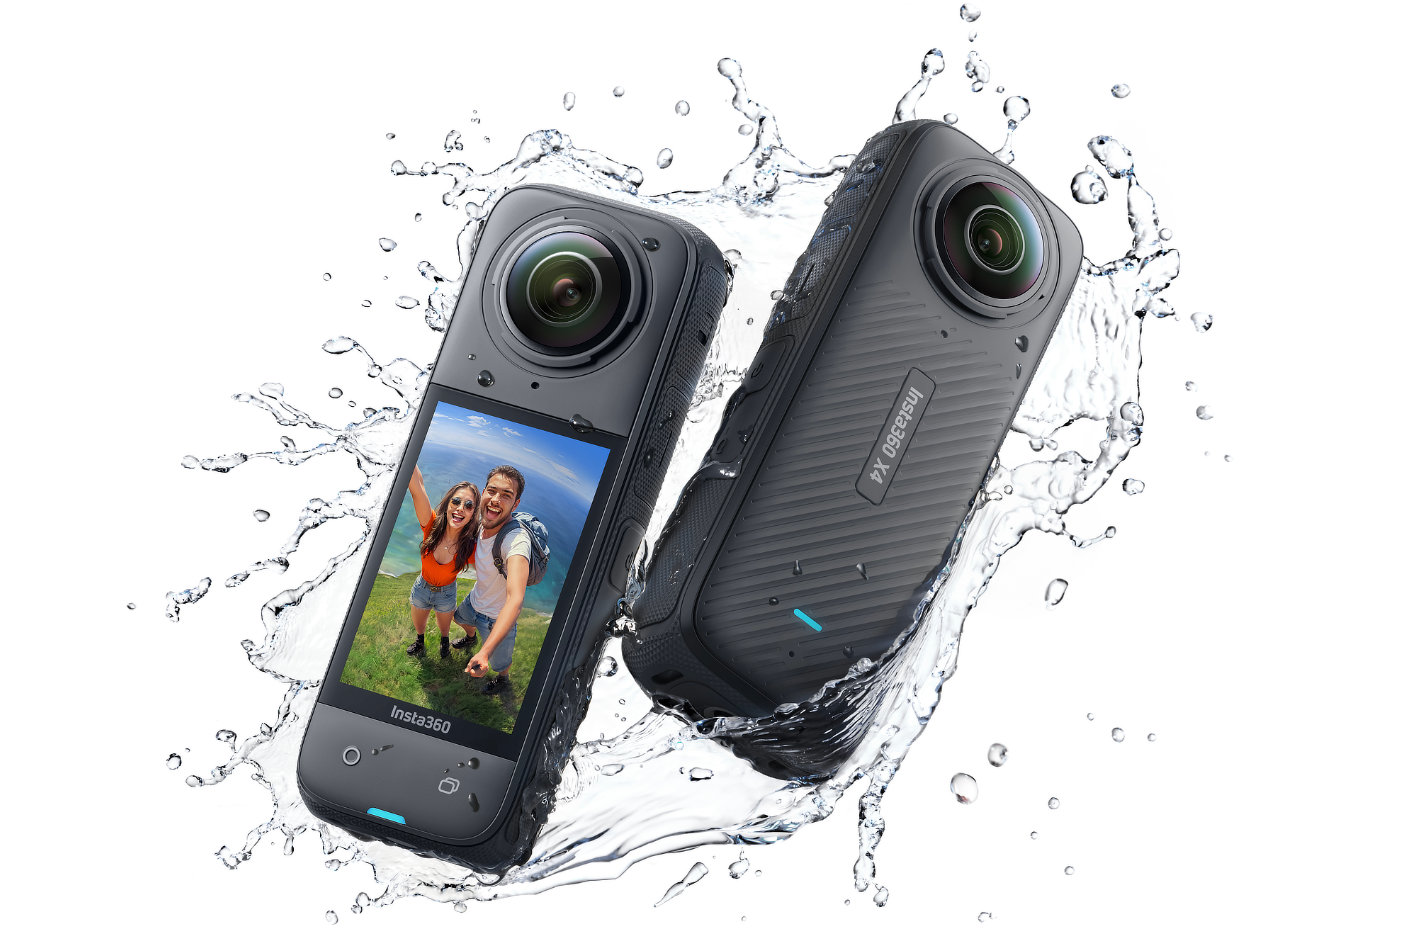 The new action cam flagship: Insta360 X4 with 8K 360° video 2